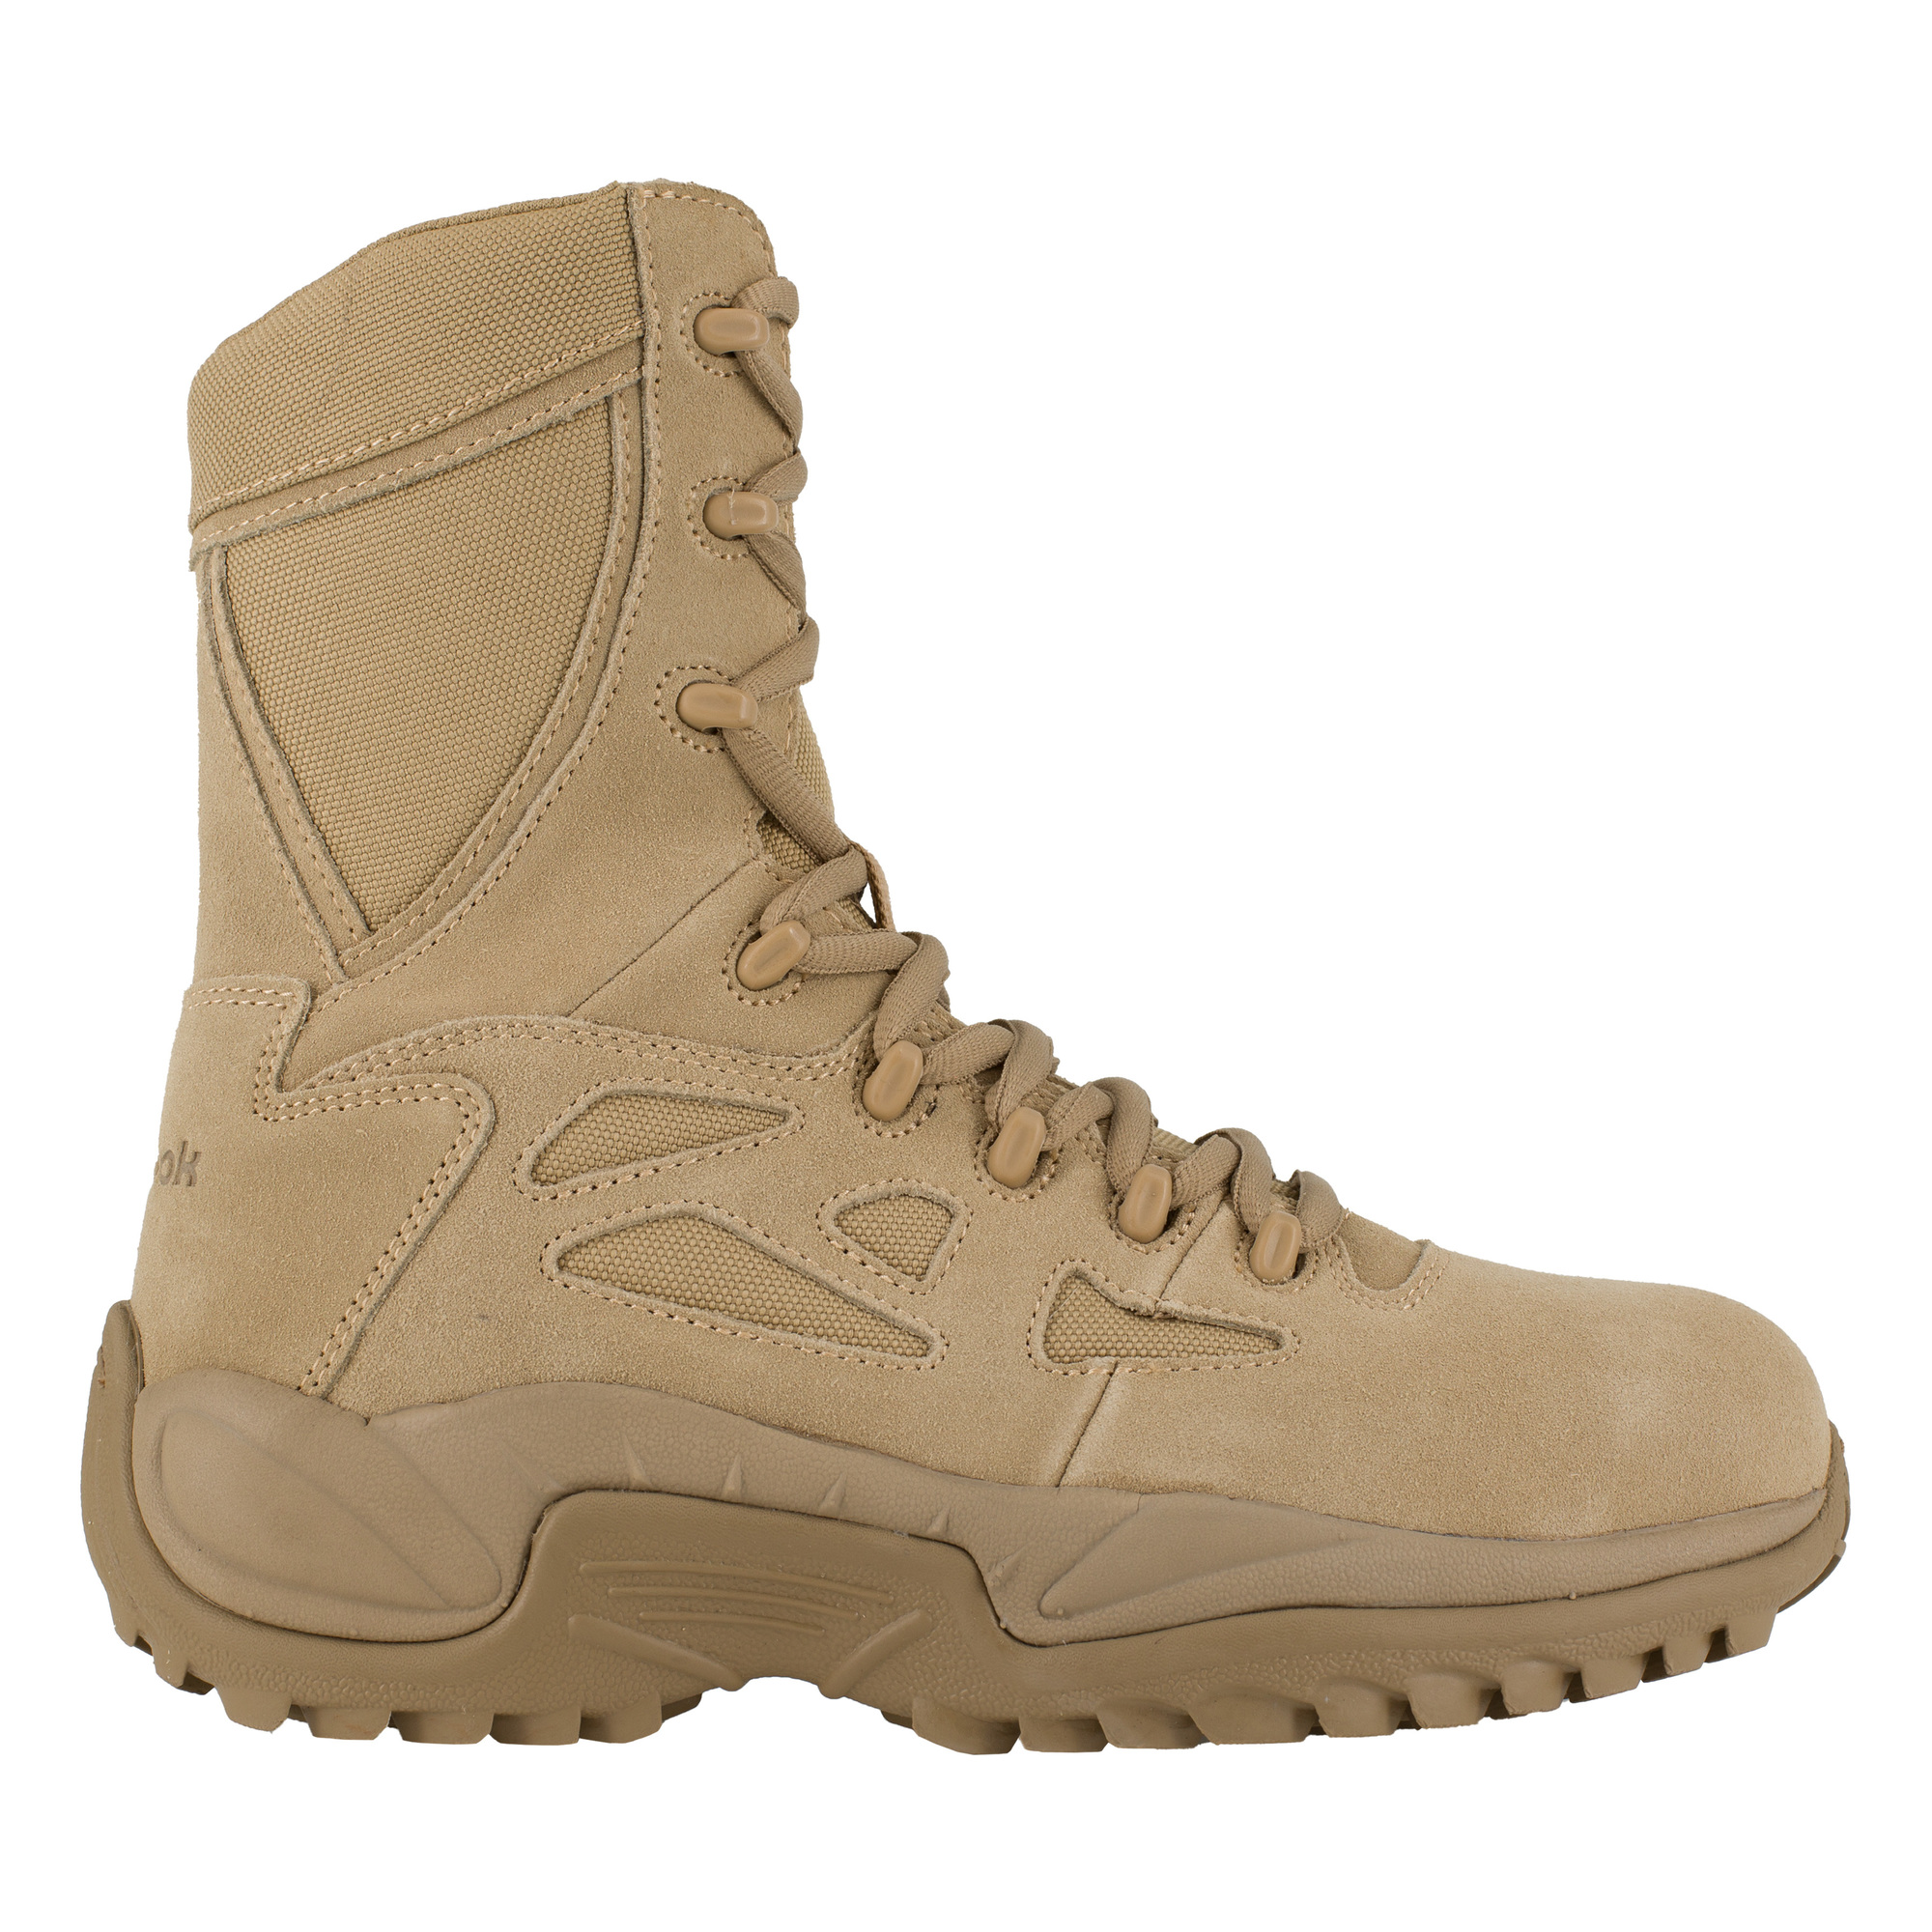 Reebok, 8Inch Stealth Tactical Boot with Side Zipper, Size 6, Width Medium, Color Desert Tan, Model RB894